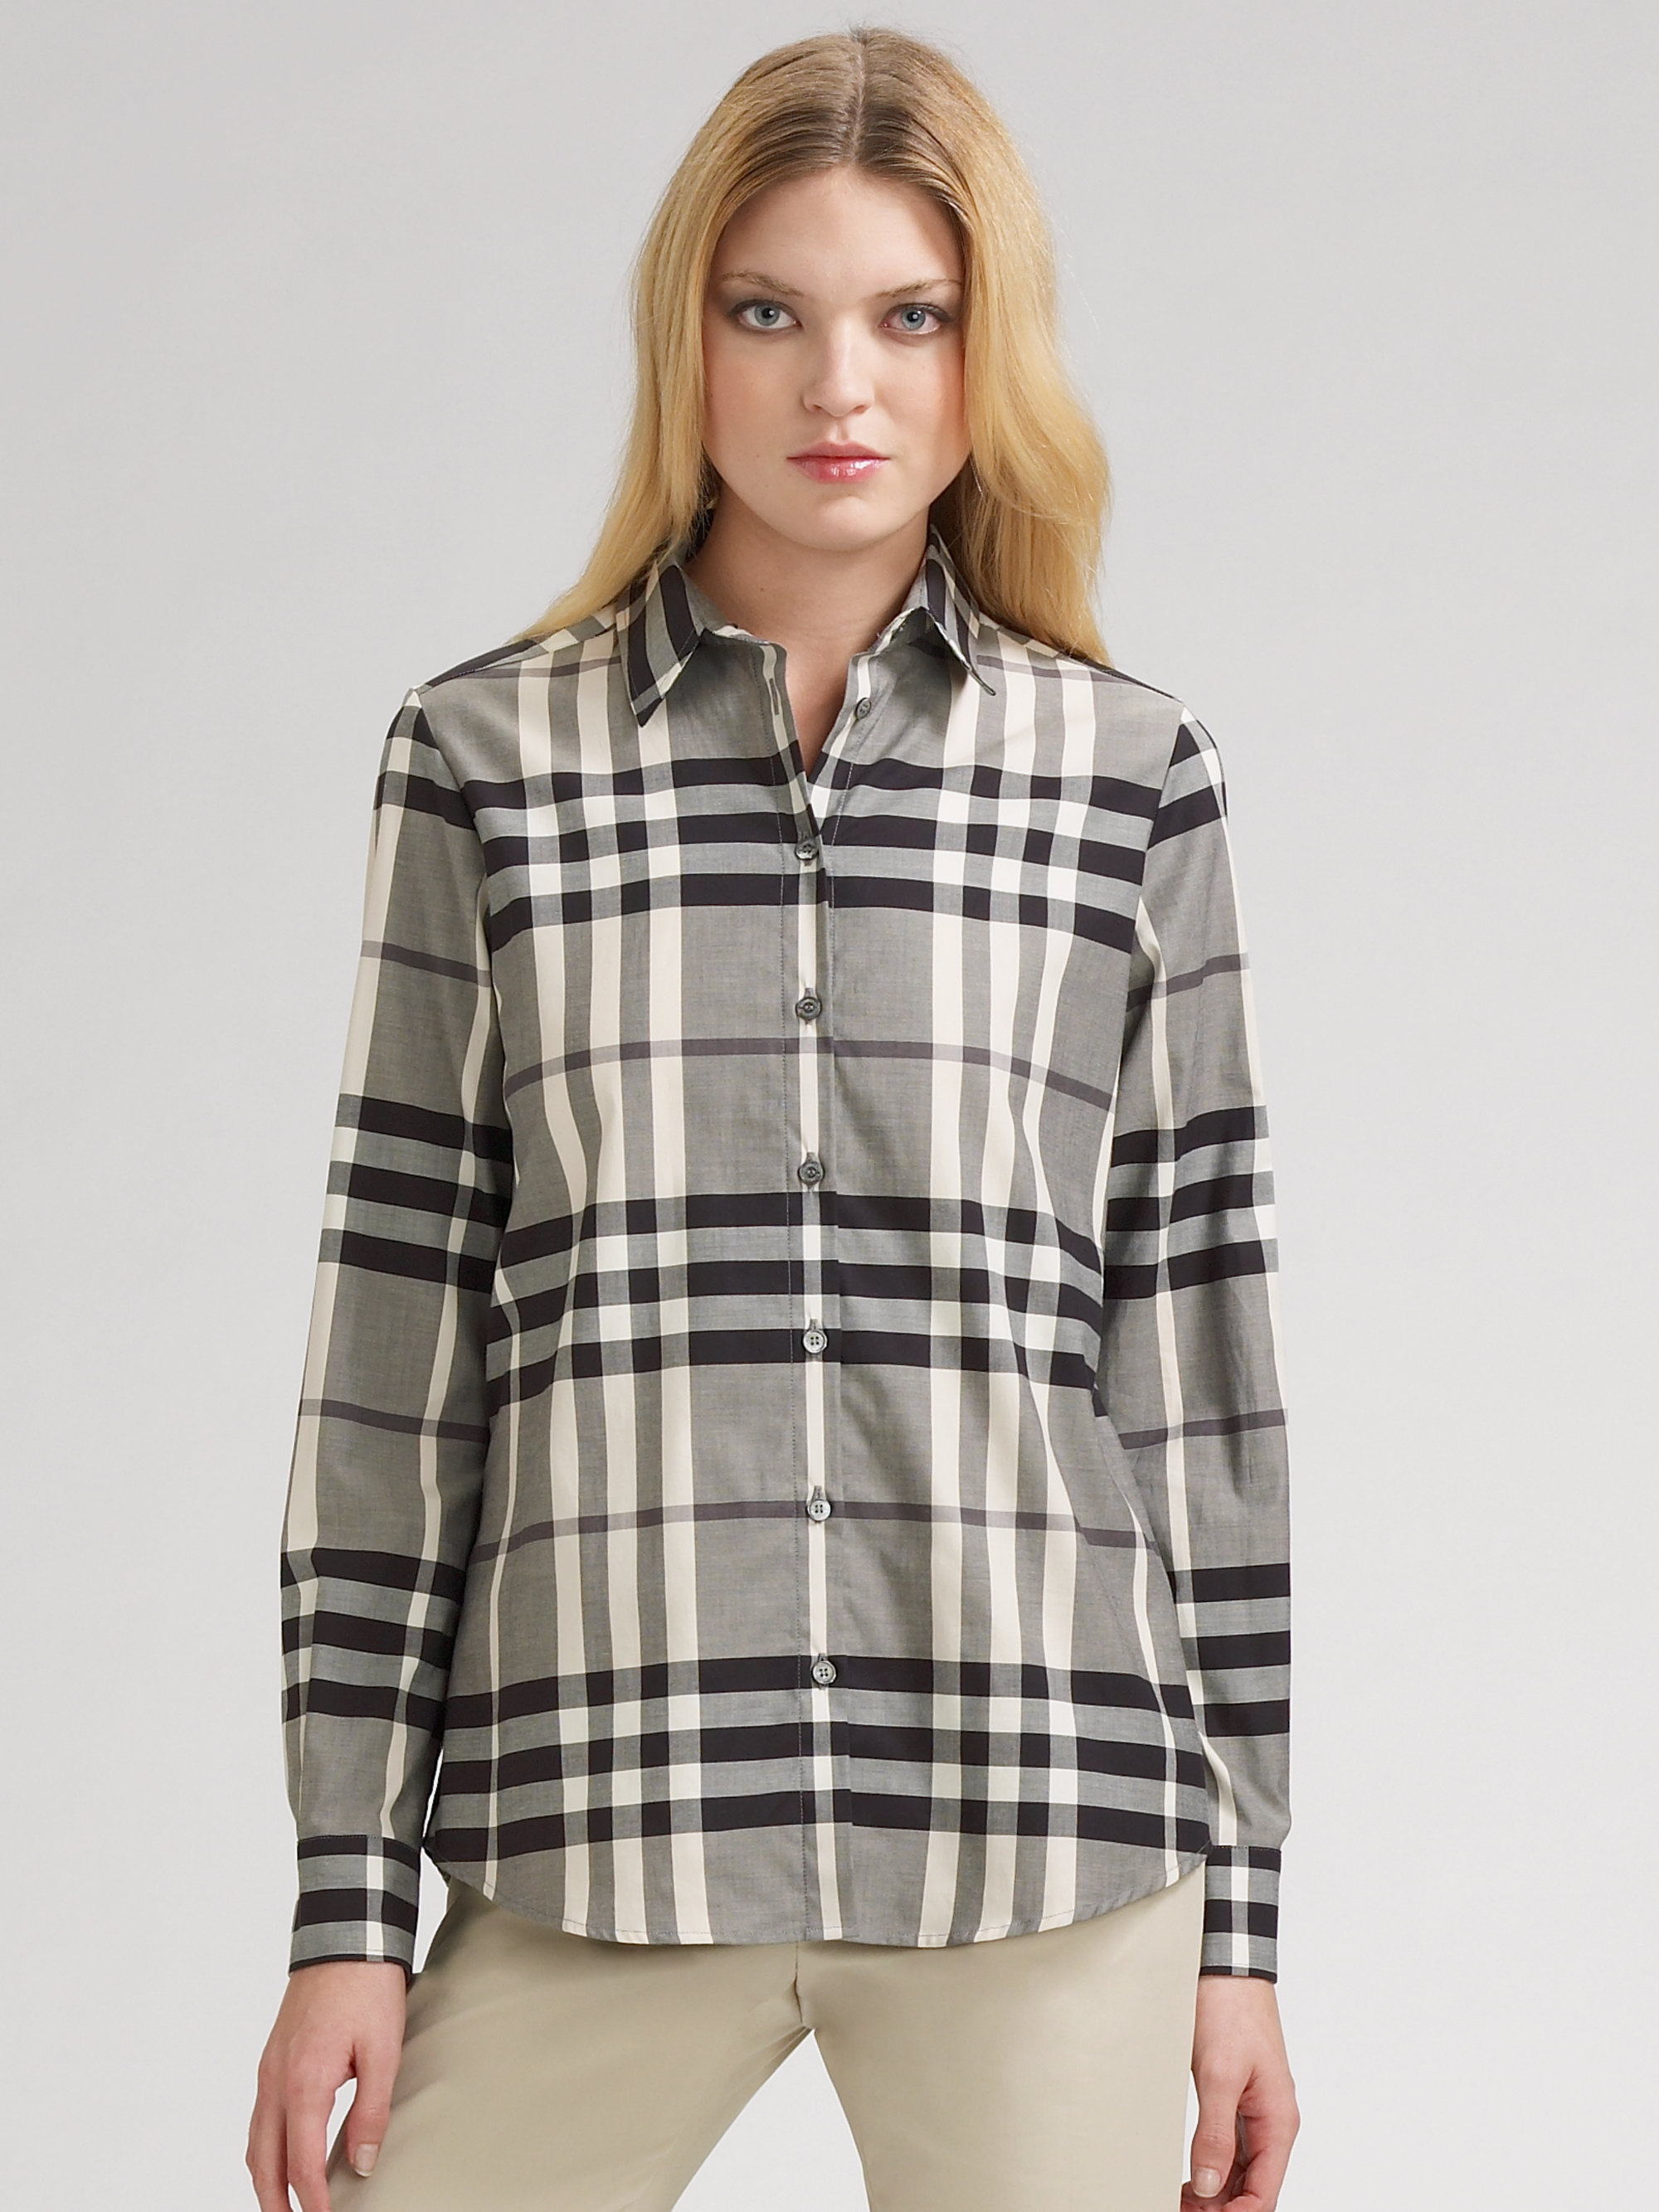 Lyst - Burberry Stretch Cotton Check Shirt in Black